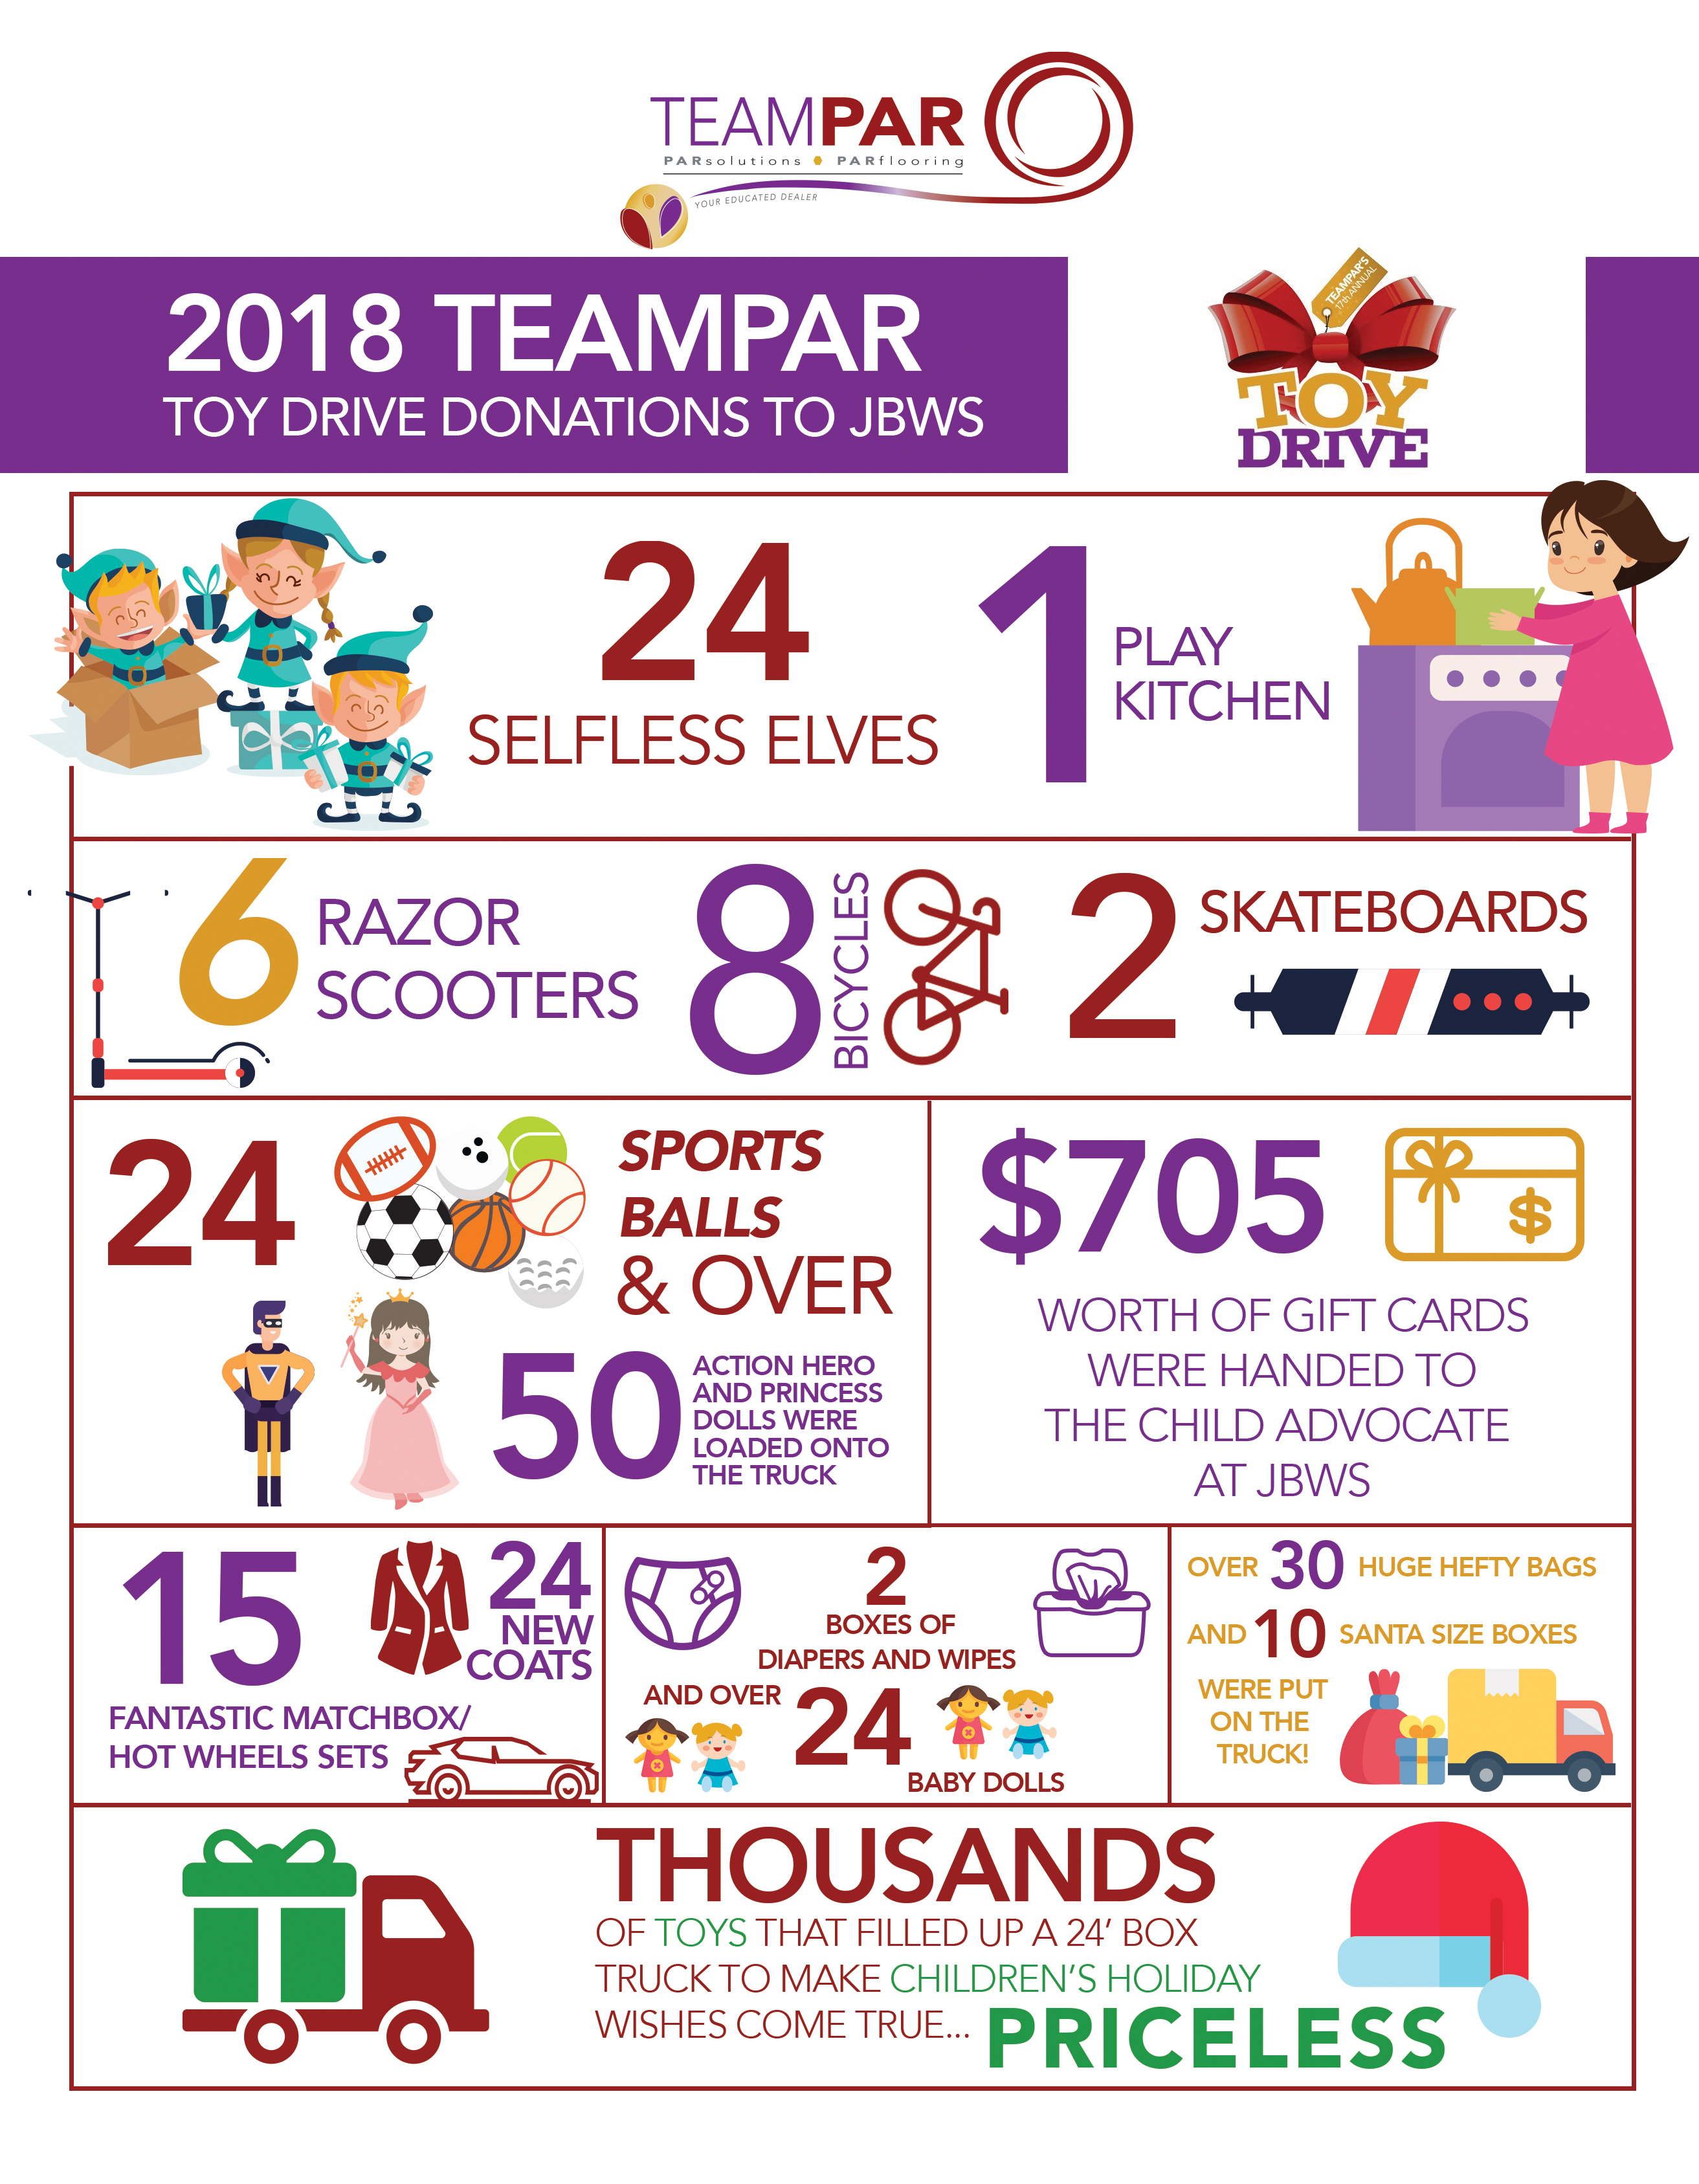 2018 TeamPAR Toy Drive Donation Infographic